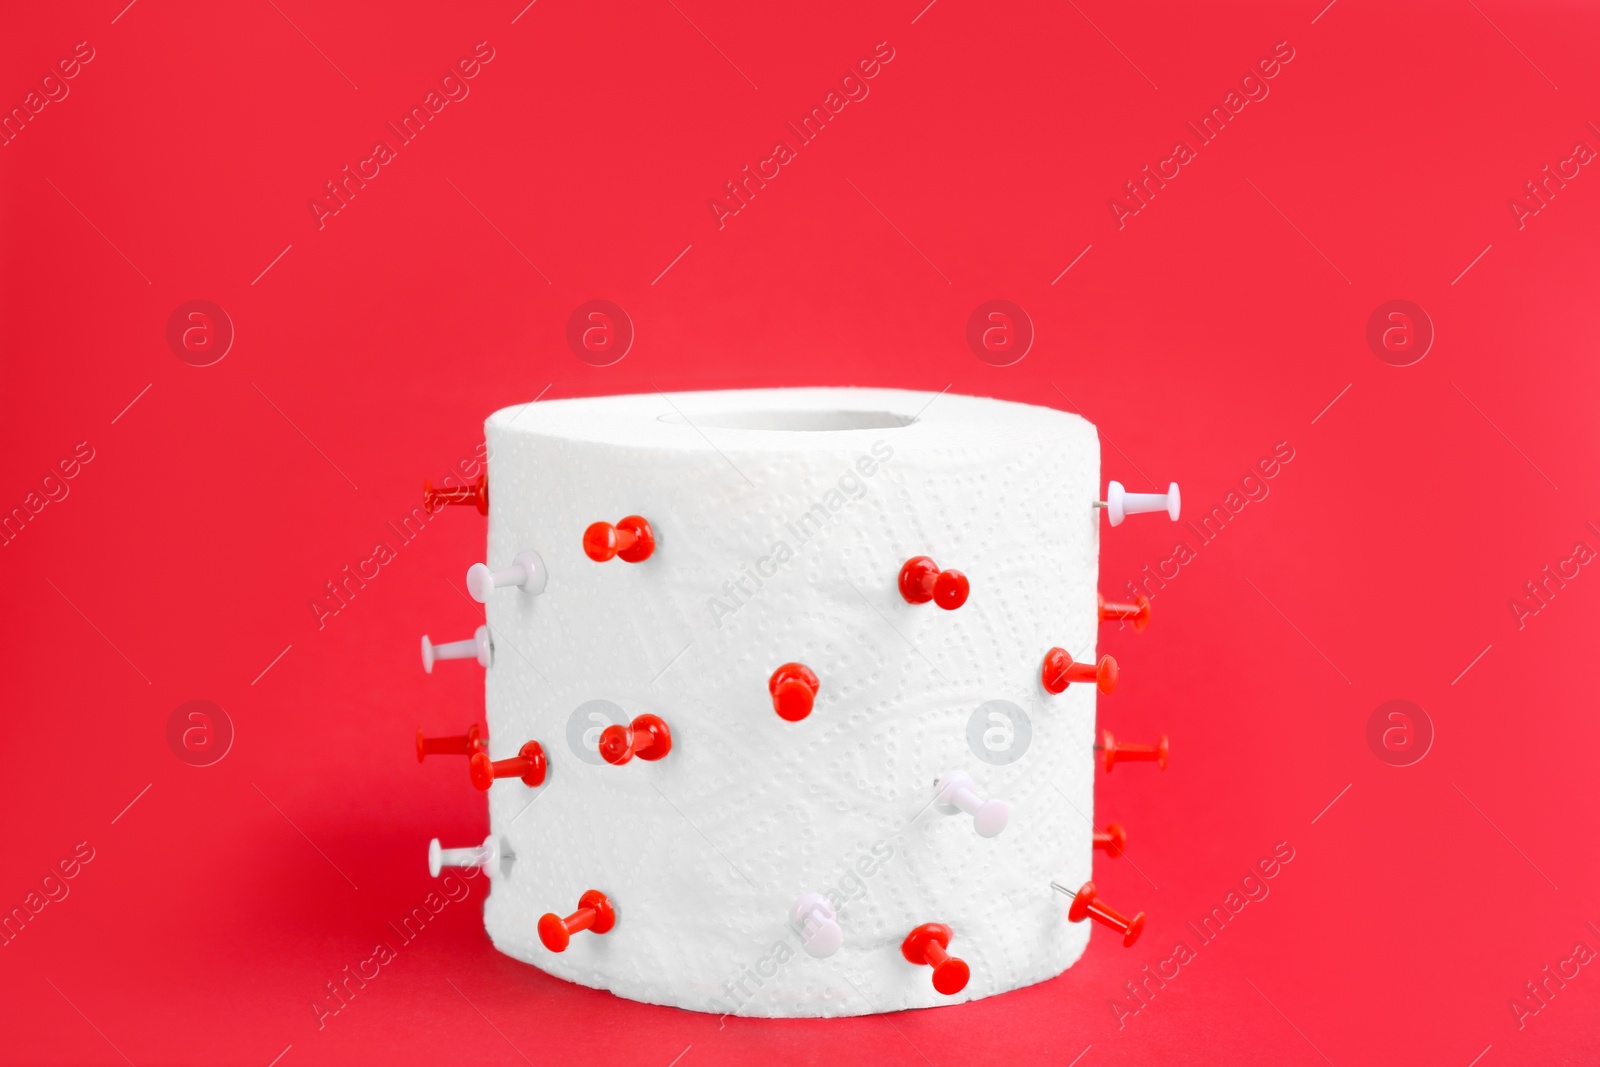 Photo of Roll of toilet paper with pins on red background. Hemorrhoid problems